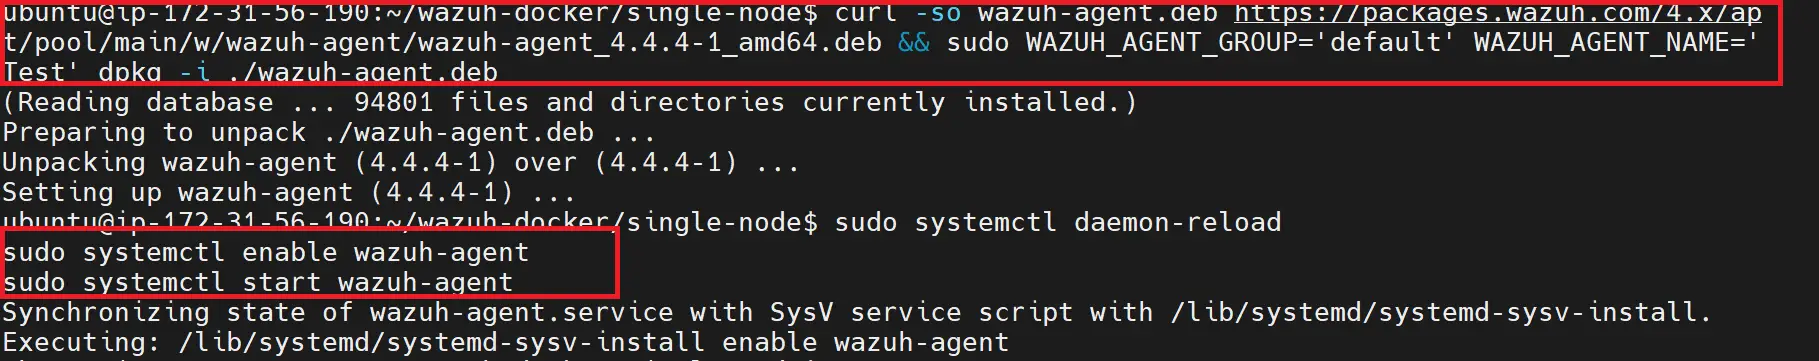 Installing and Deploying Wazuh with Docker Compose Containers